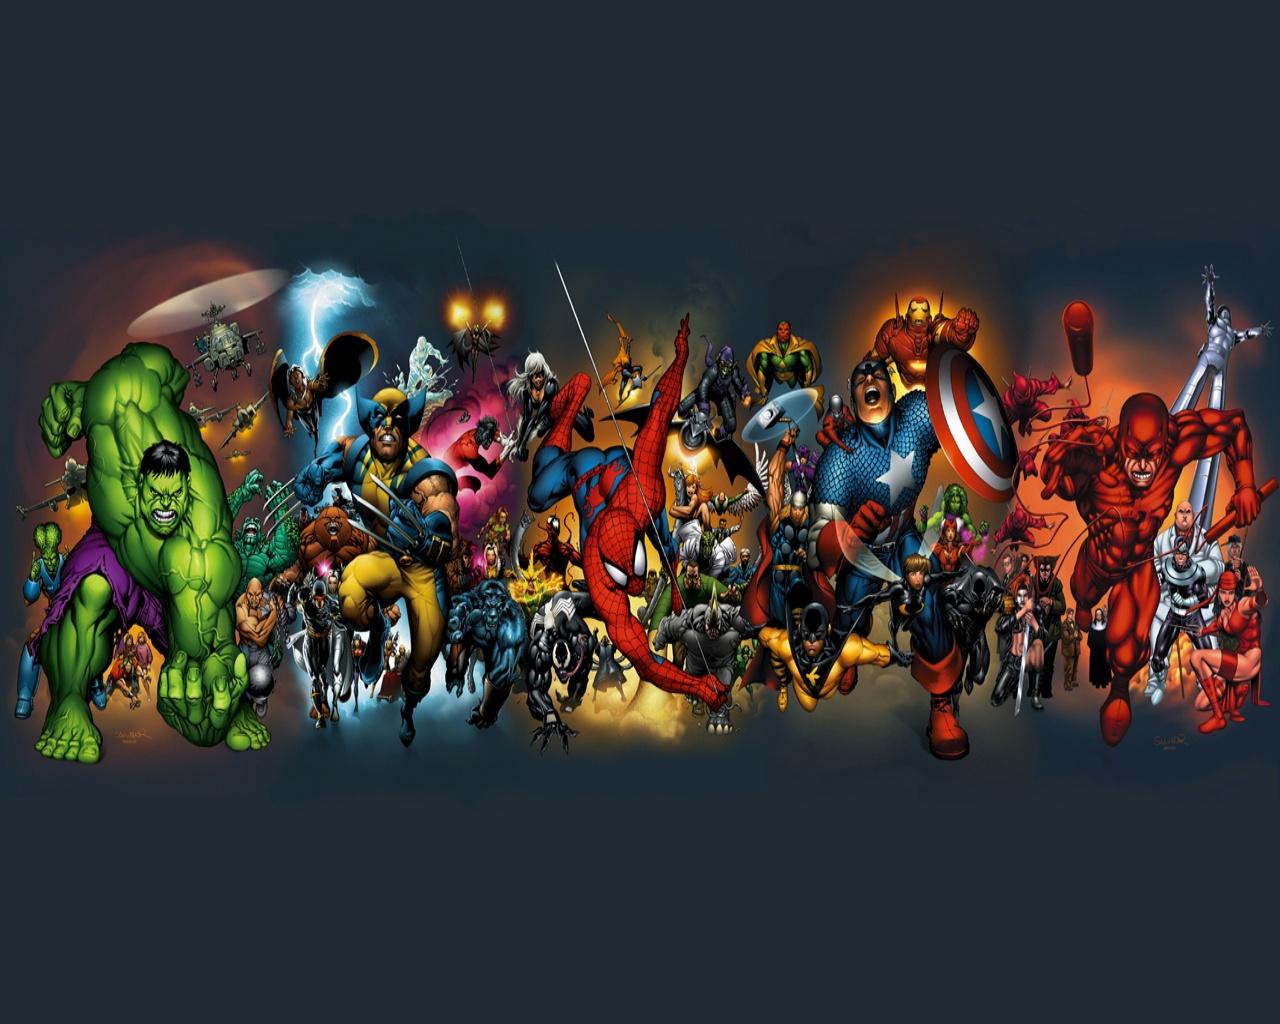 Free download wallpapers marvel universe comics wallpapers marvel